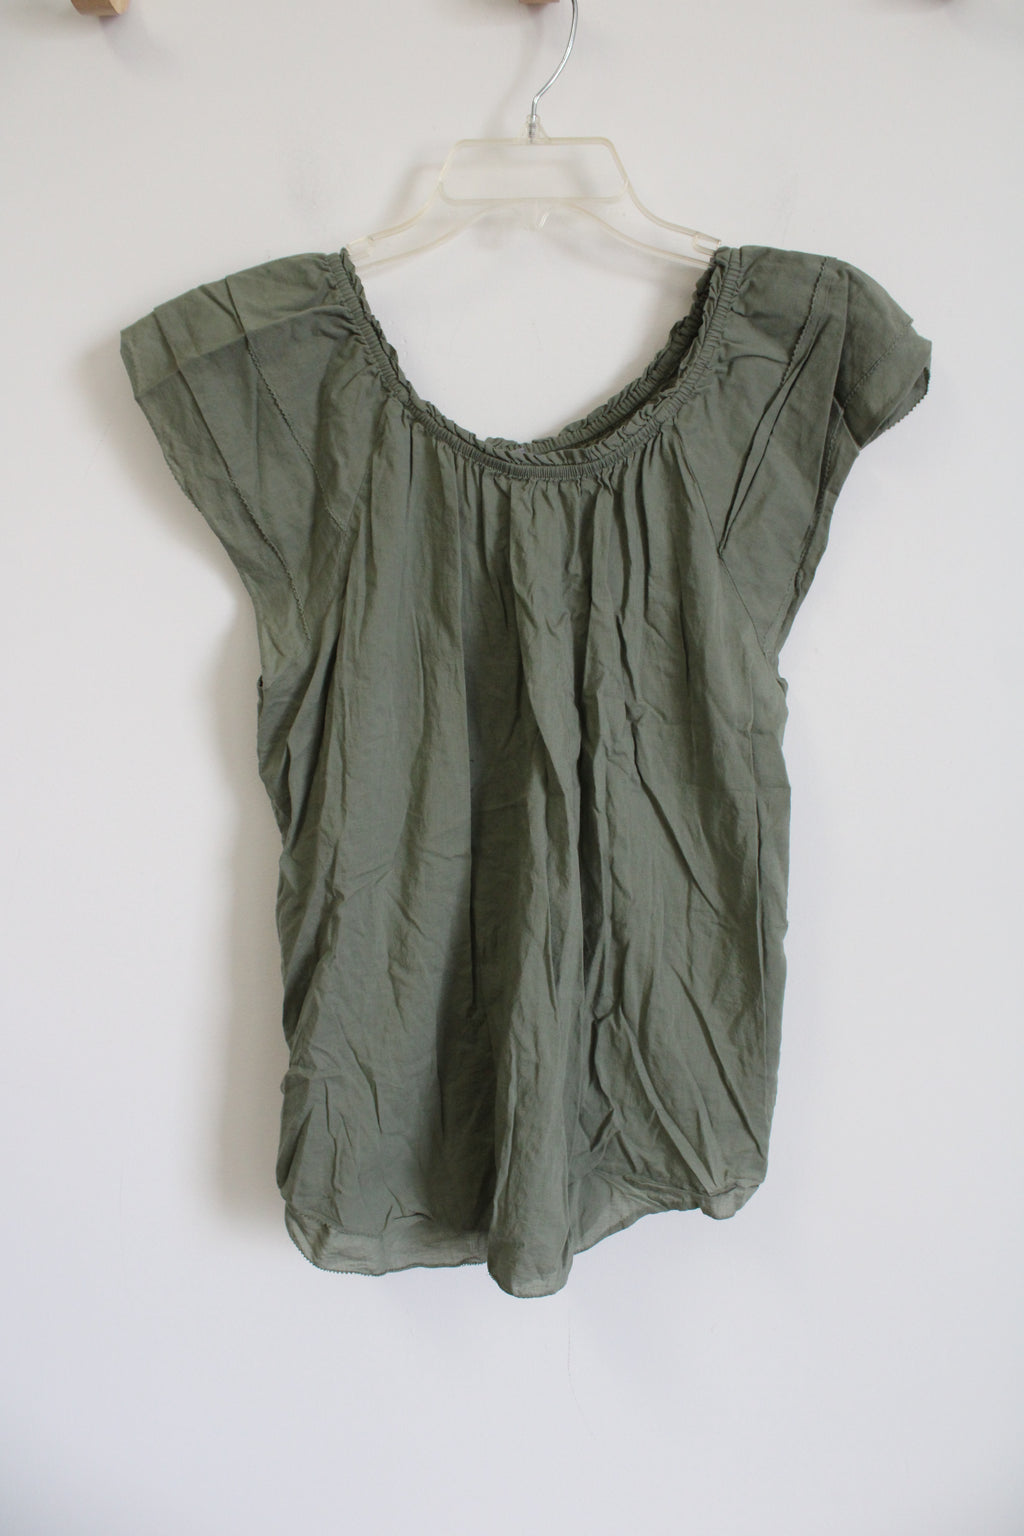 Aerie Olive Green Top | M